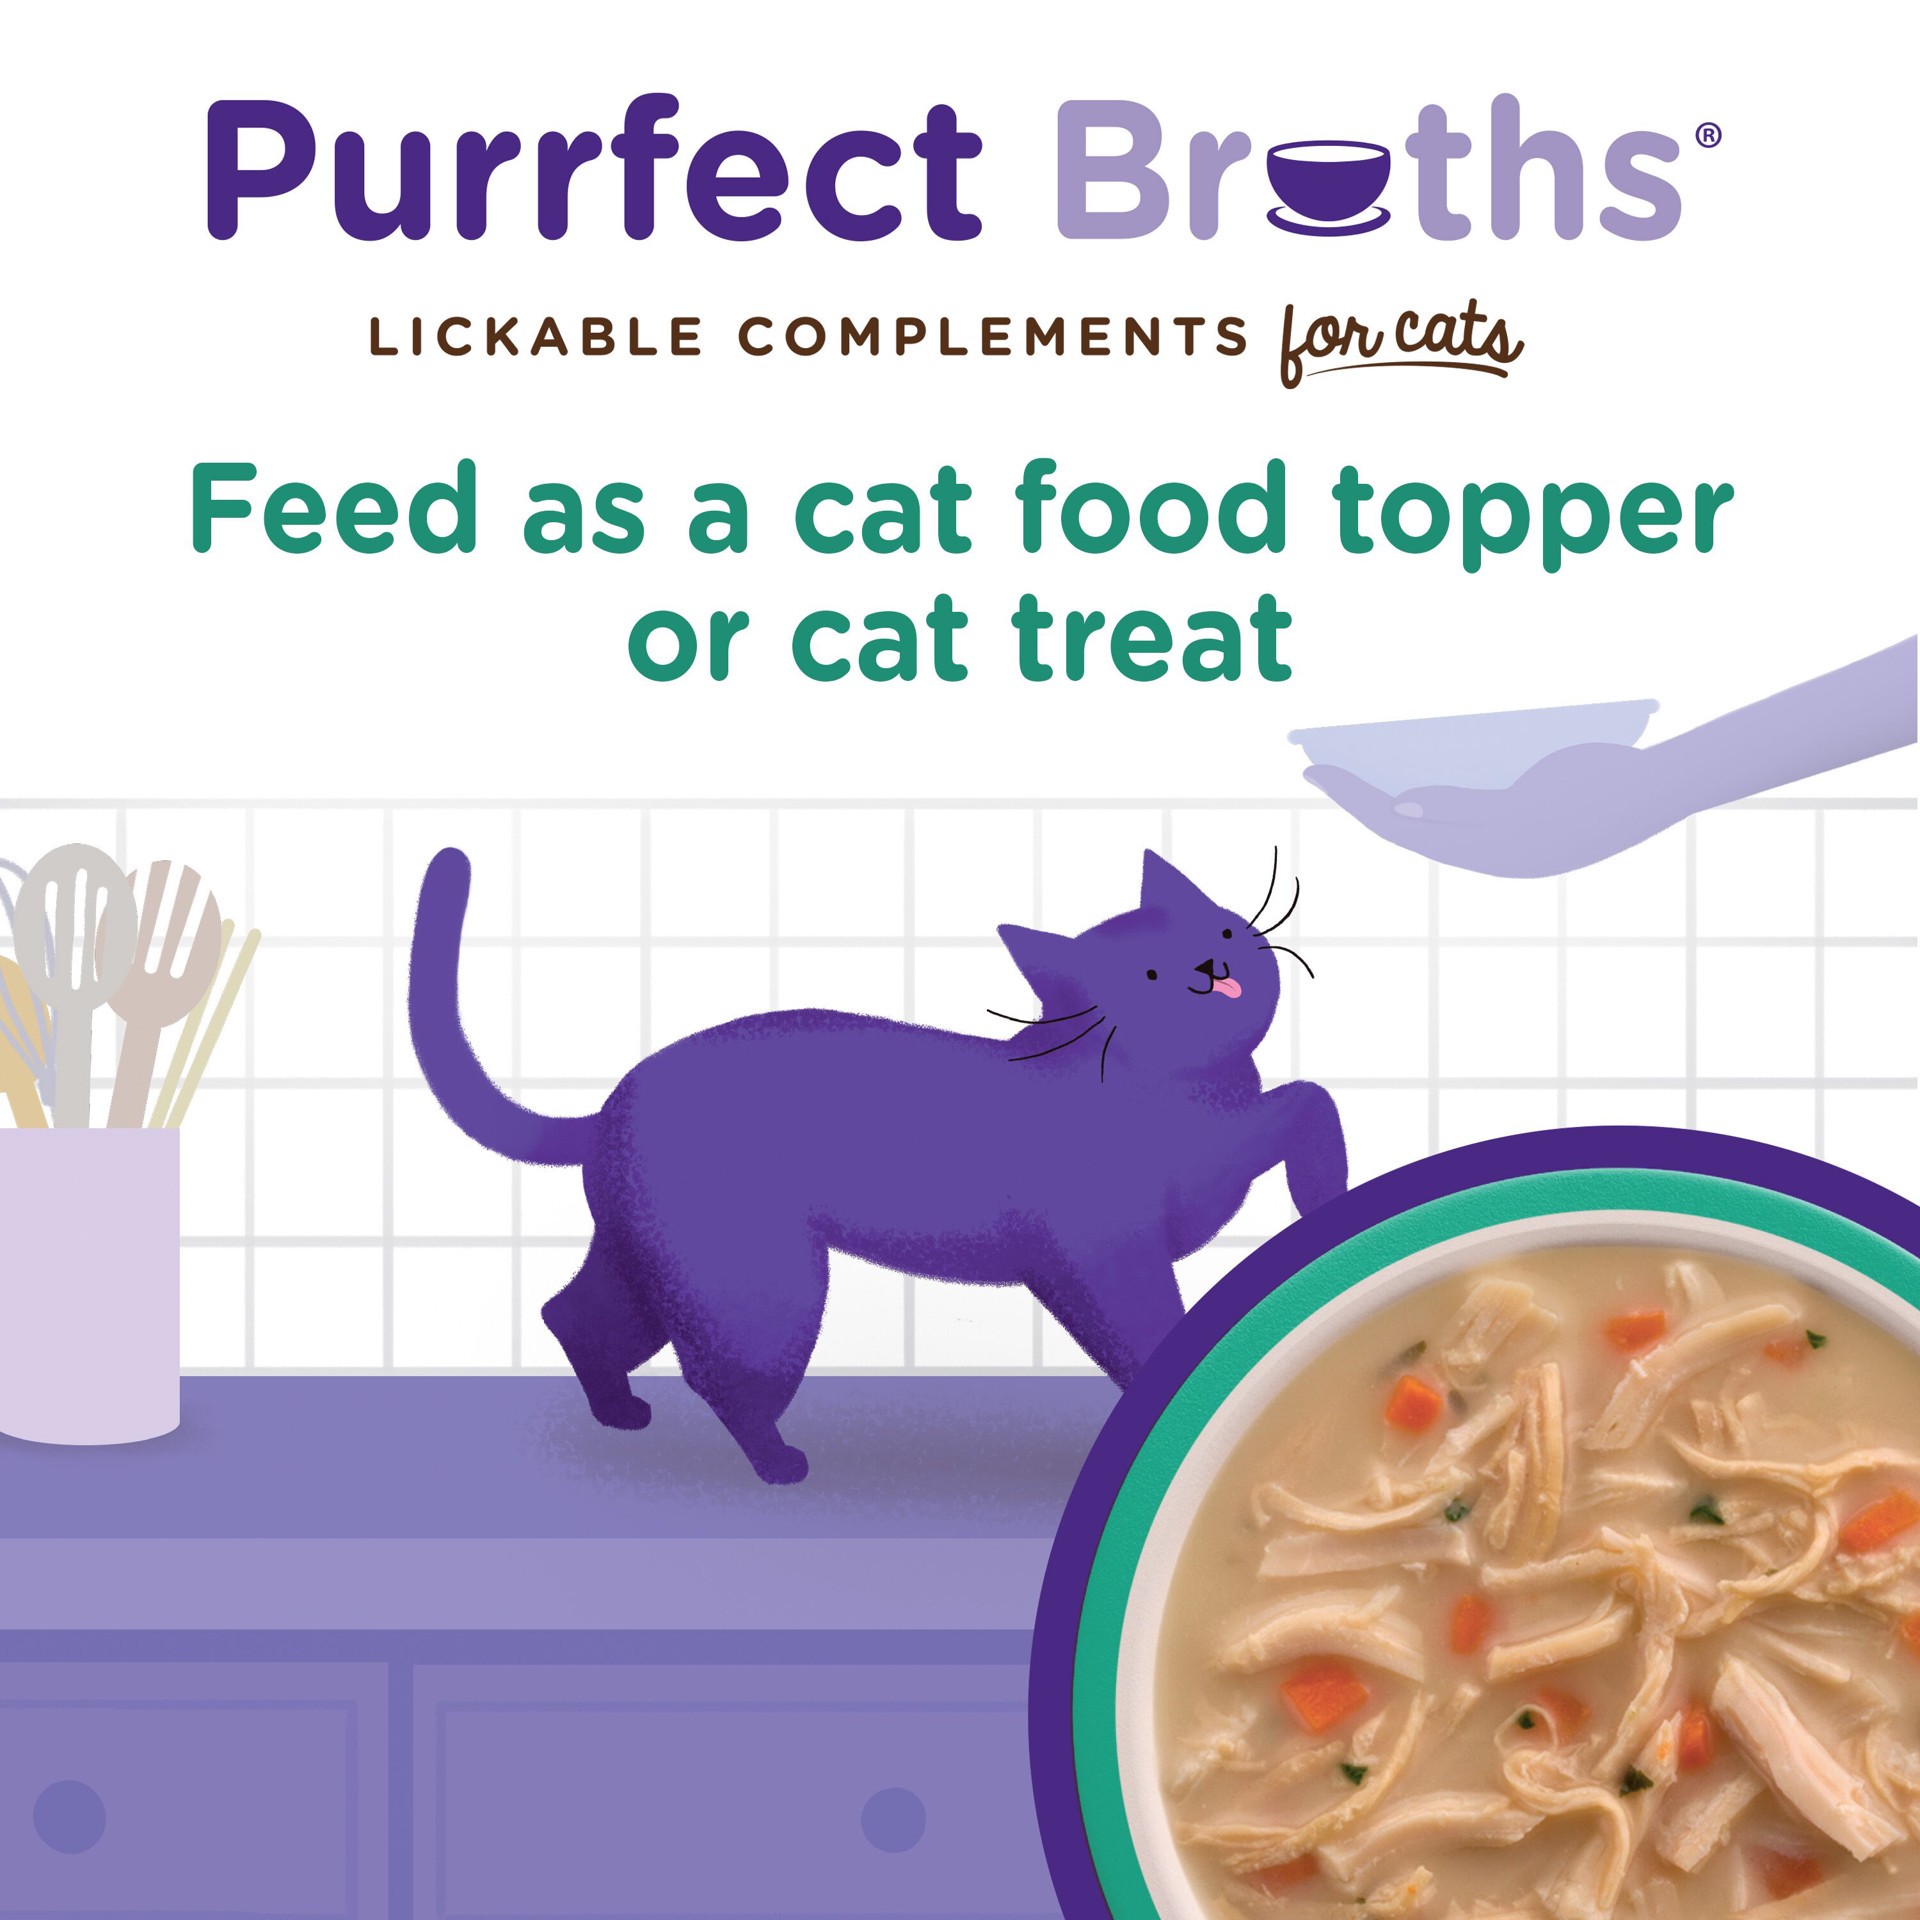 slide 7 of 8, Rachael Ray Nutrish Purrfect Broths Creamy Chicken Recipe, Lickable Complements for Cats, 1.4 oz. Pouch, 1.4 oz